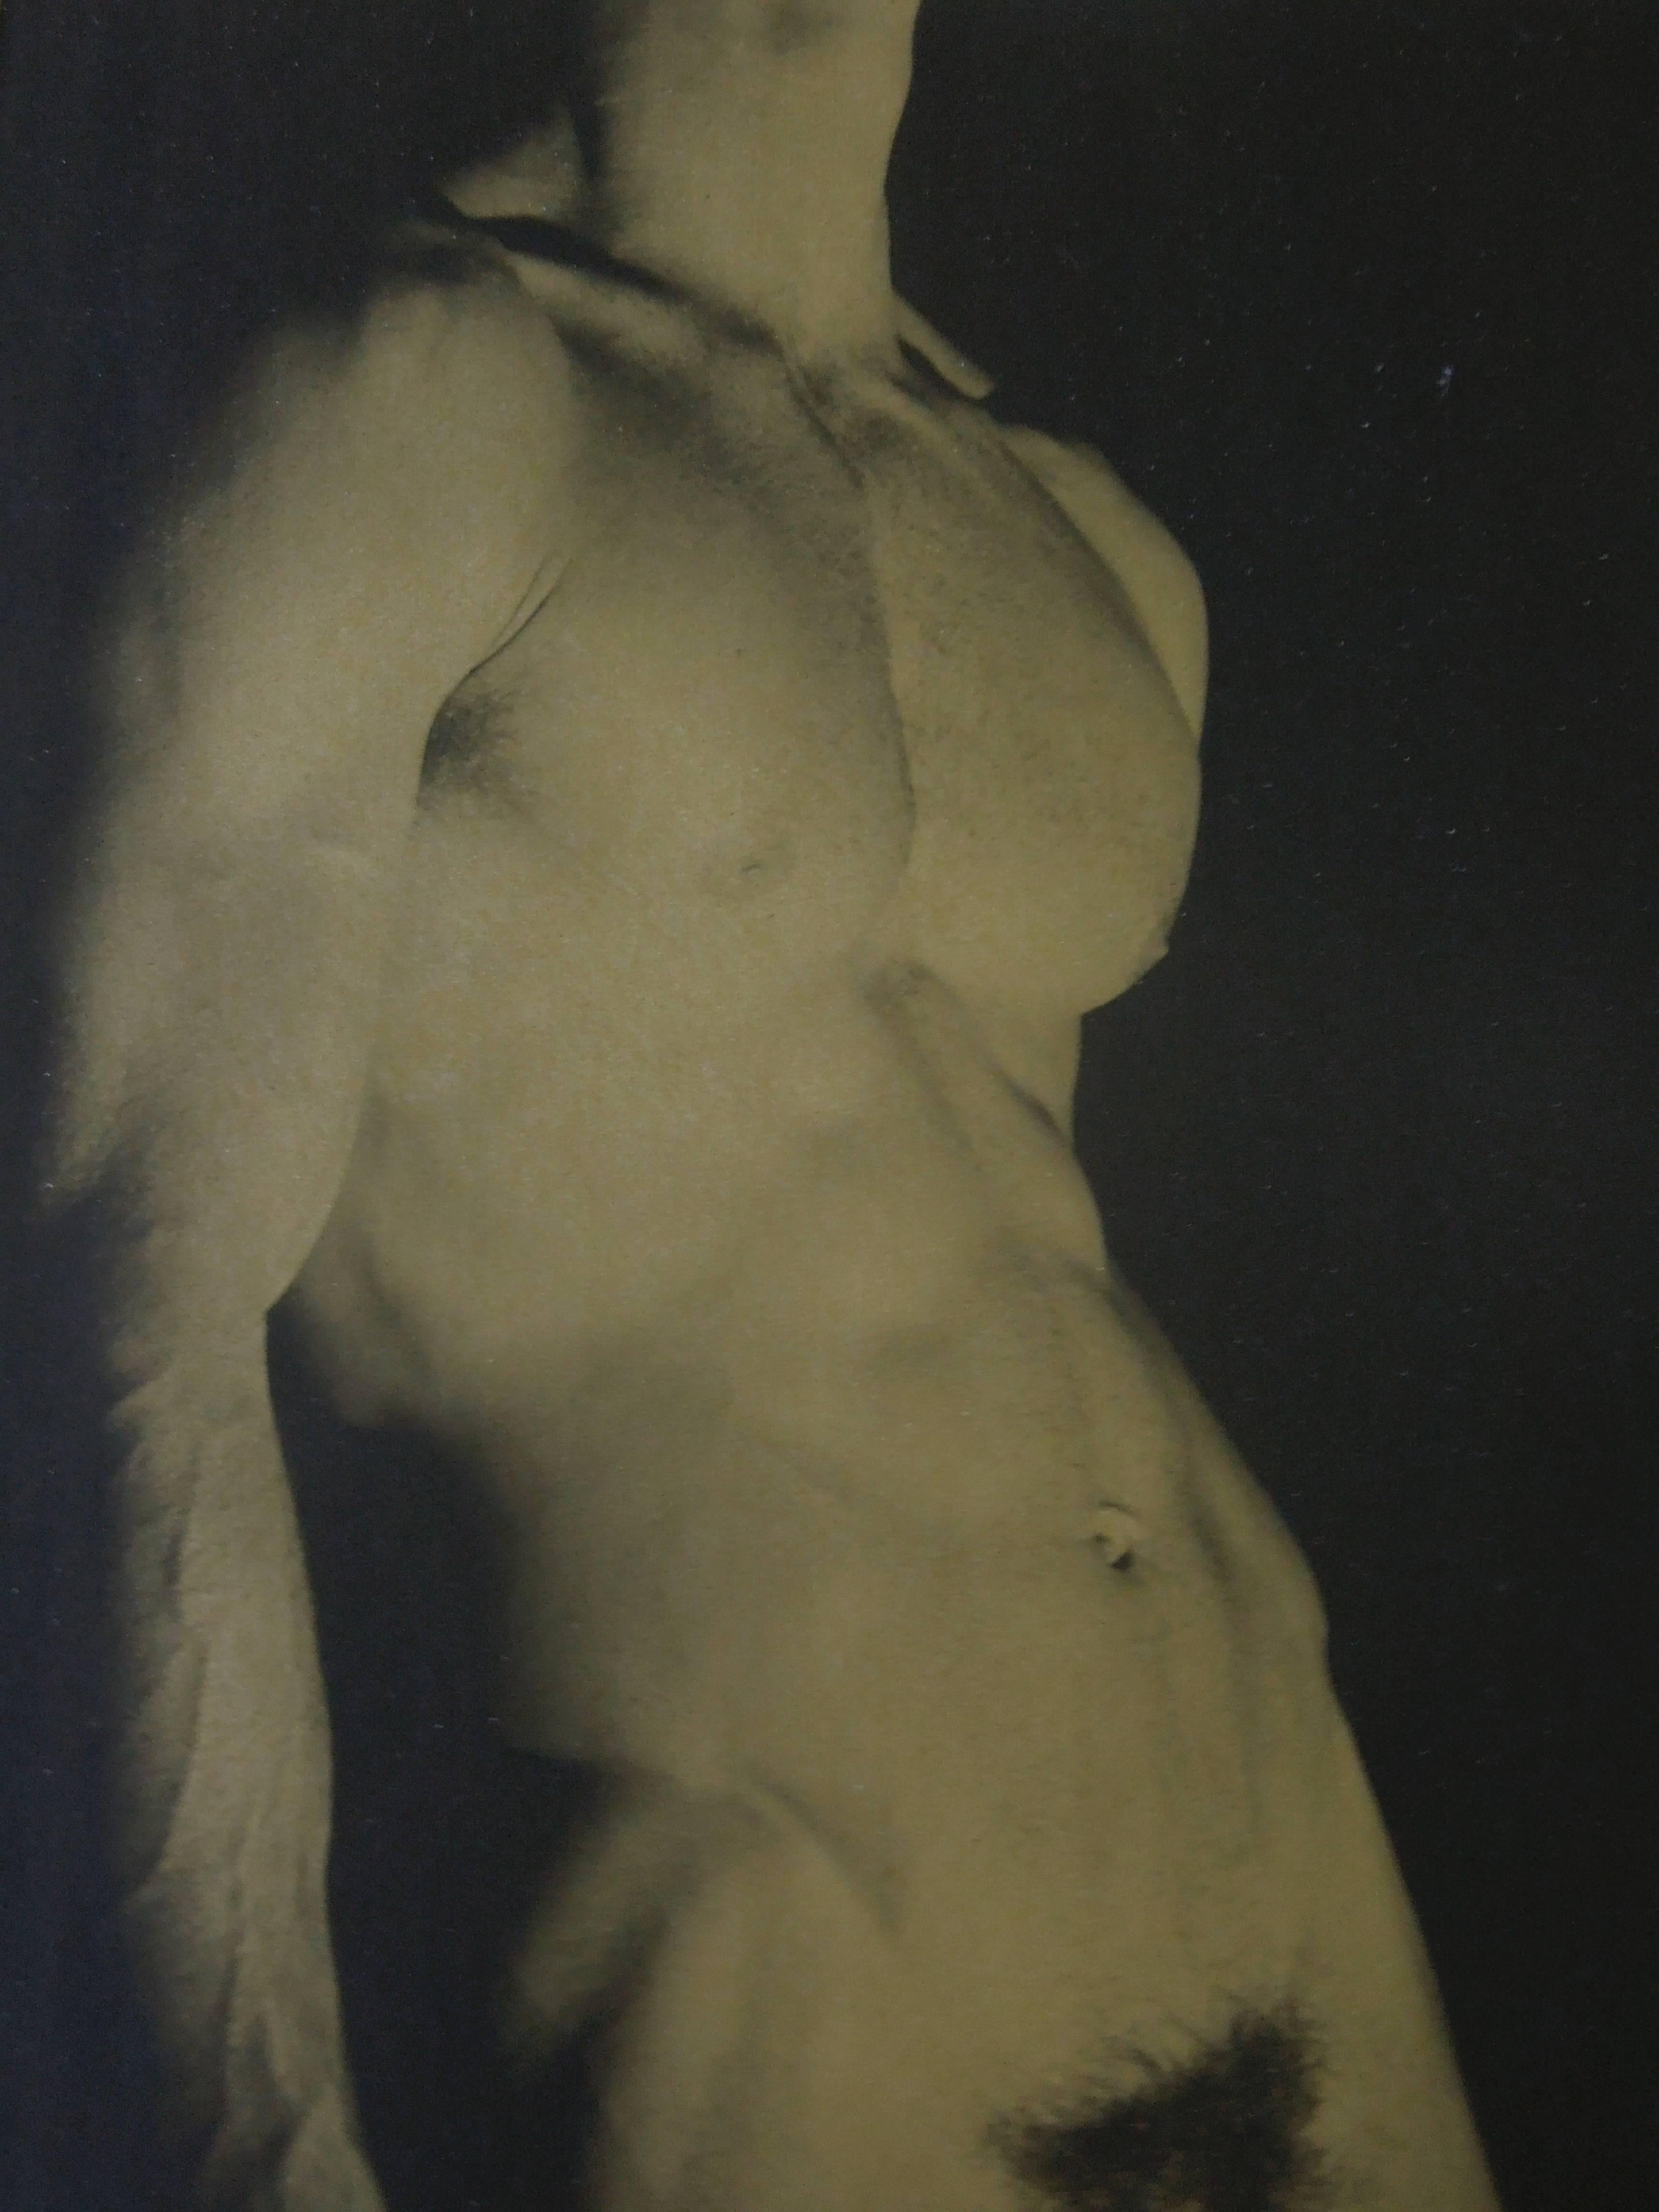 American Pair of Gold & Silver Male Nude Original Photographs By George Machado